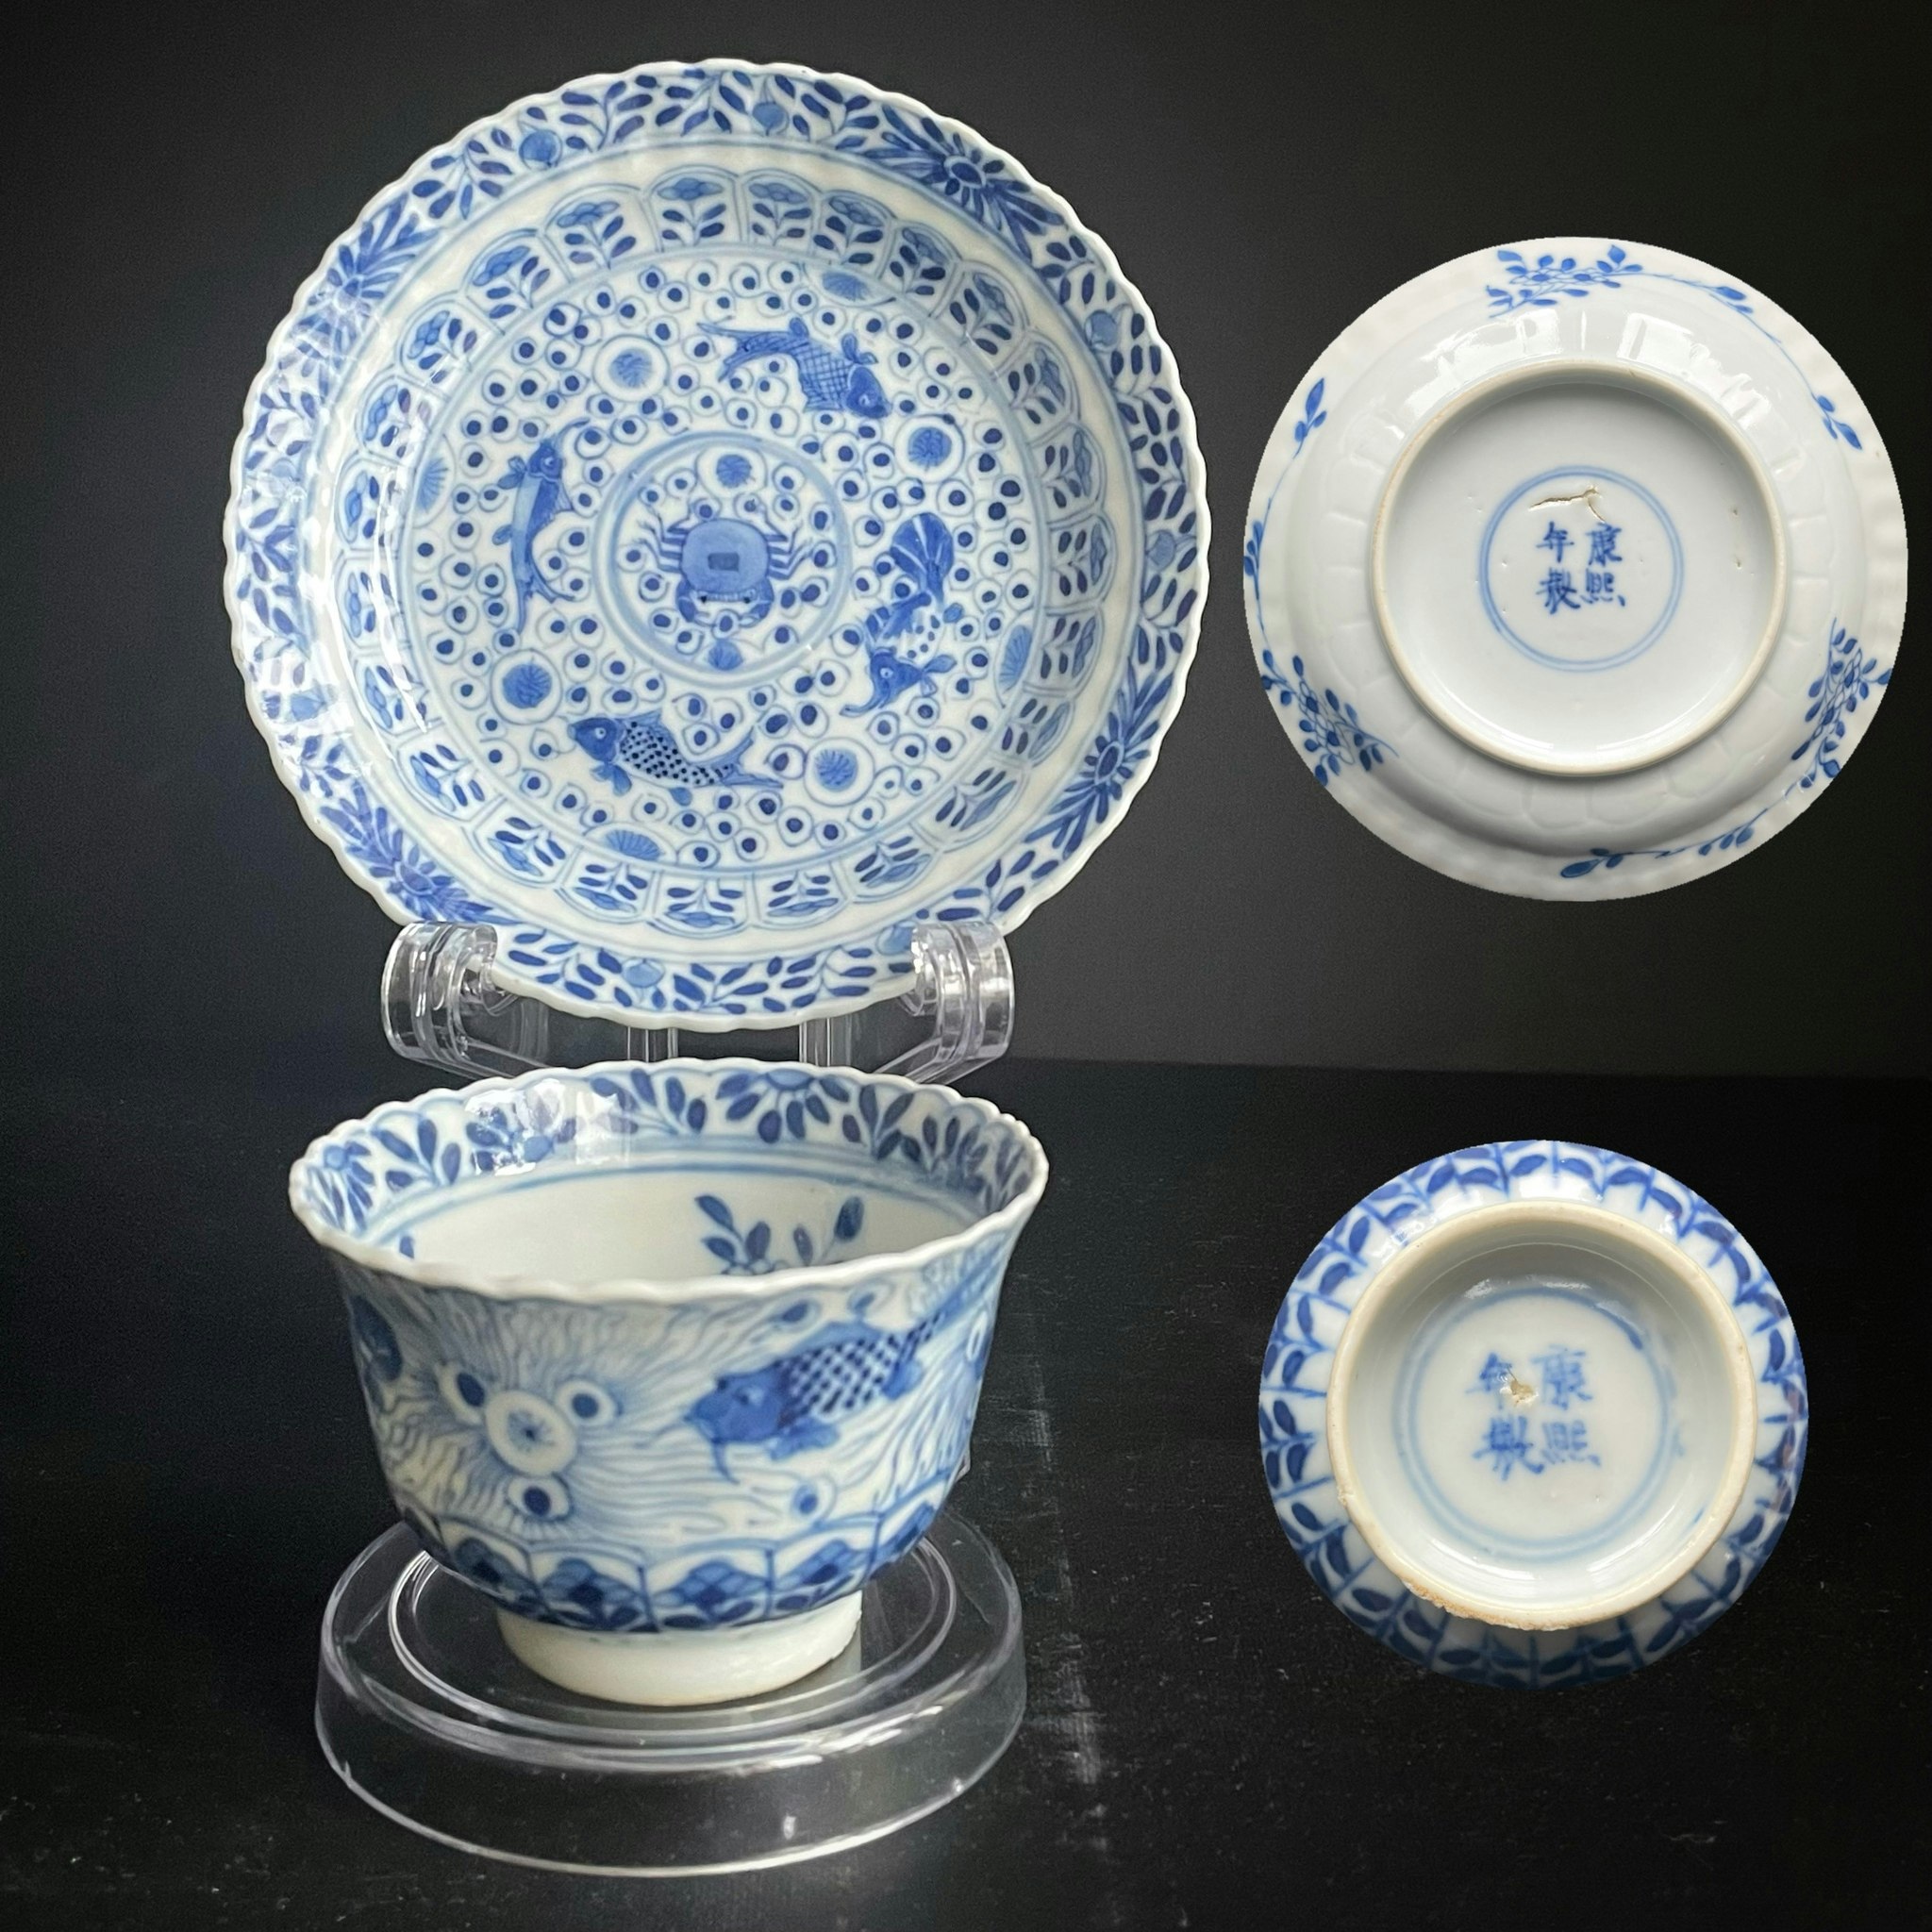 Antique Chinese Teacup & Saucer in underglazed blue & white, Late Qing #883, 885